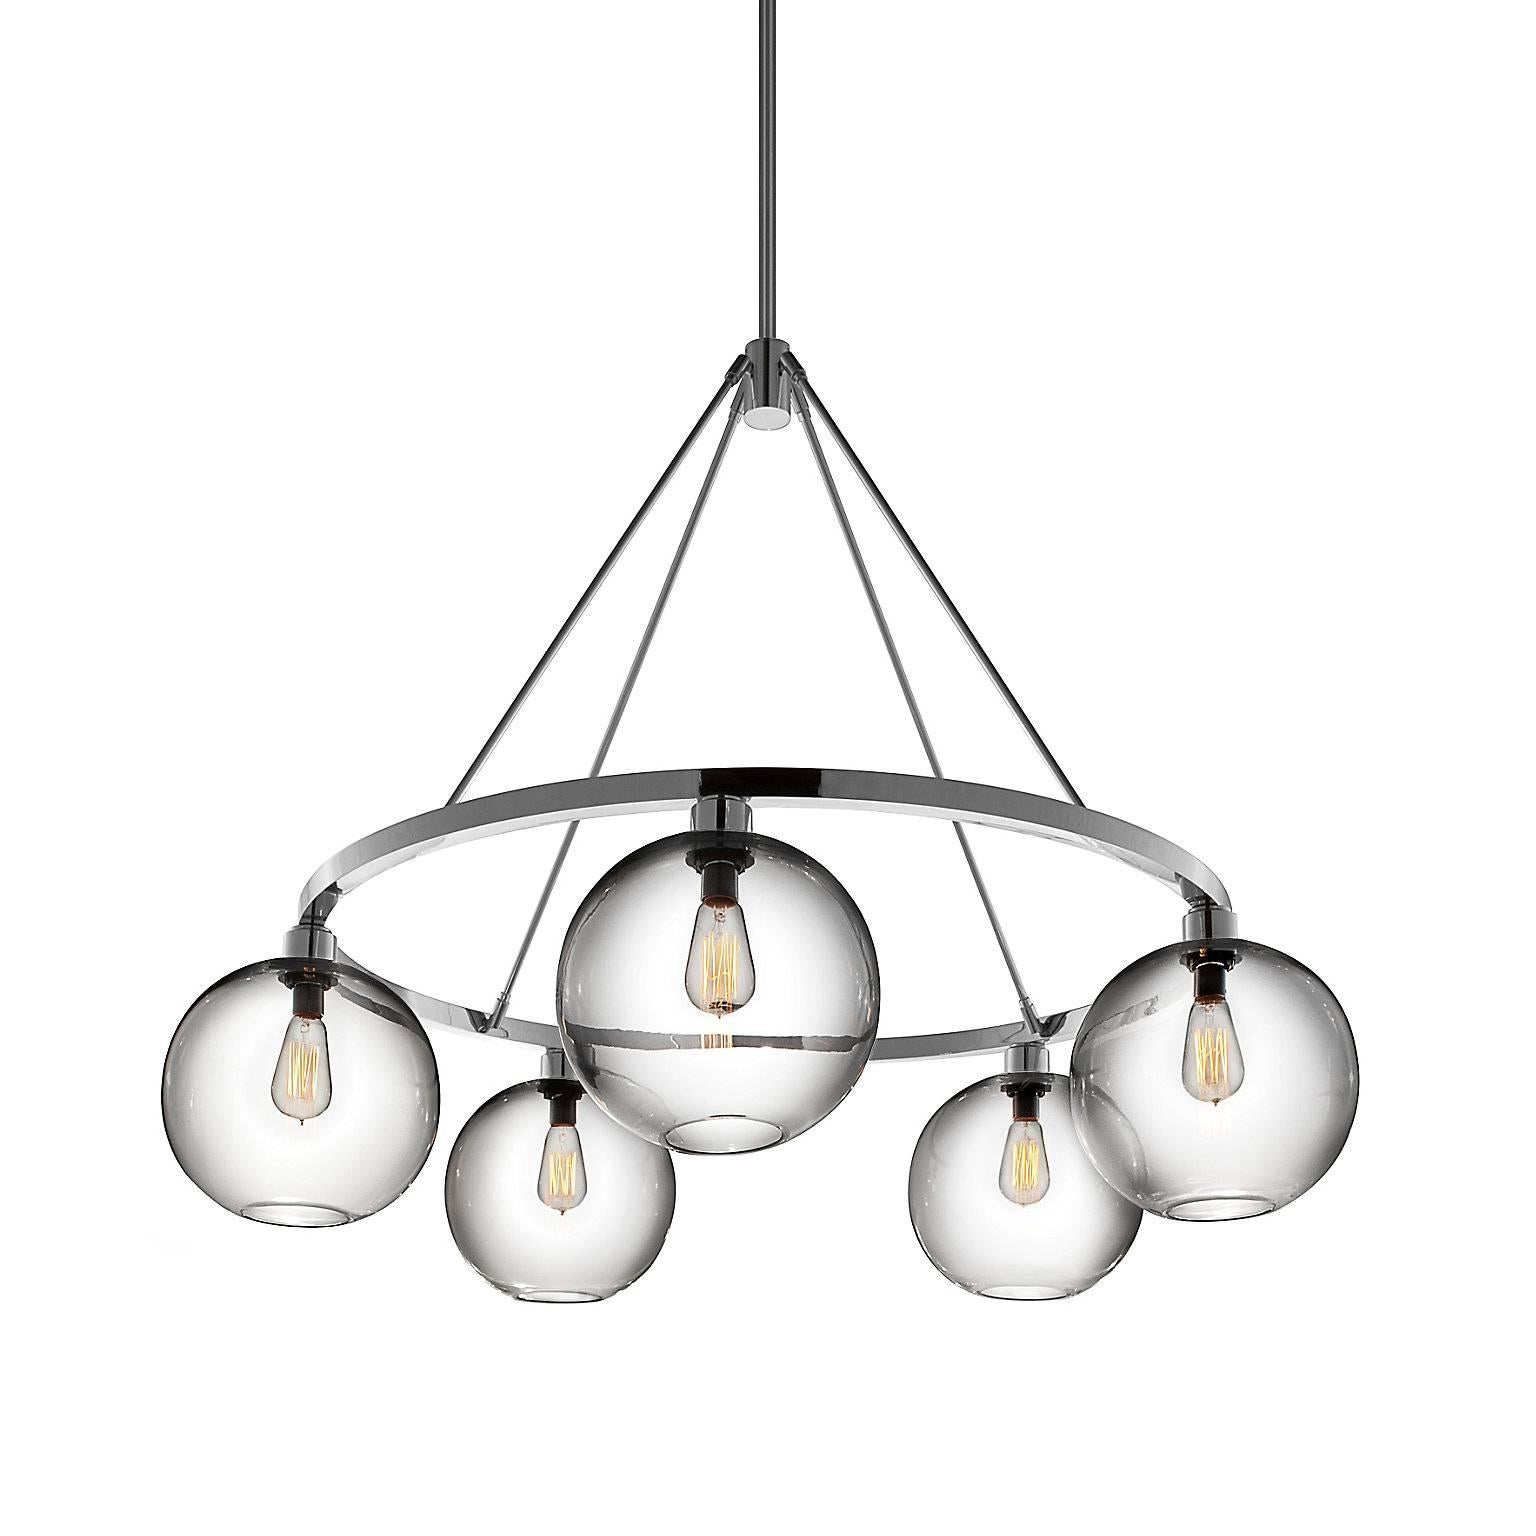 Solitaire Crystal Handblown Modern Glass Polished Nickel Chandelier Light For Sale